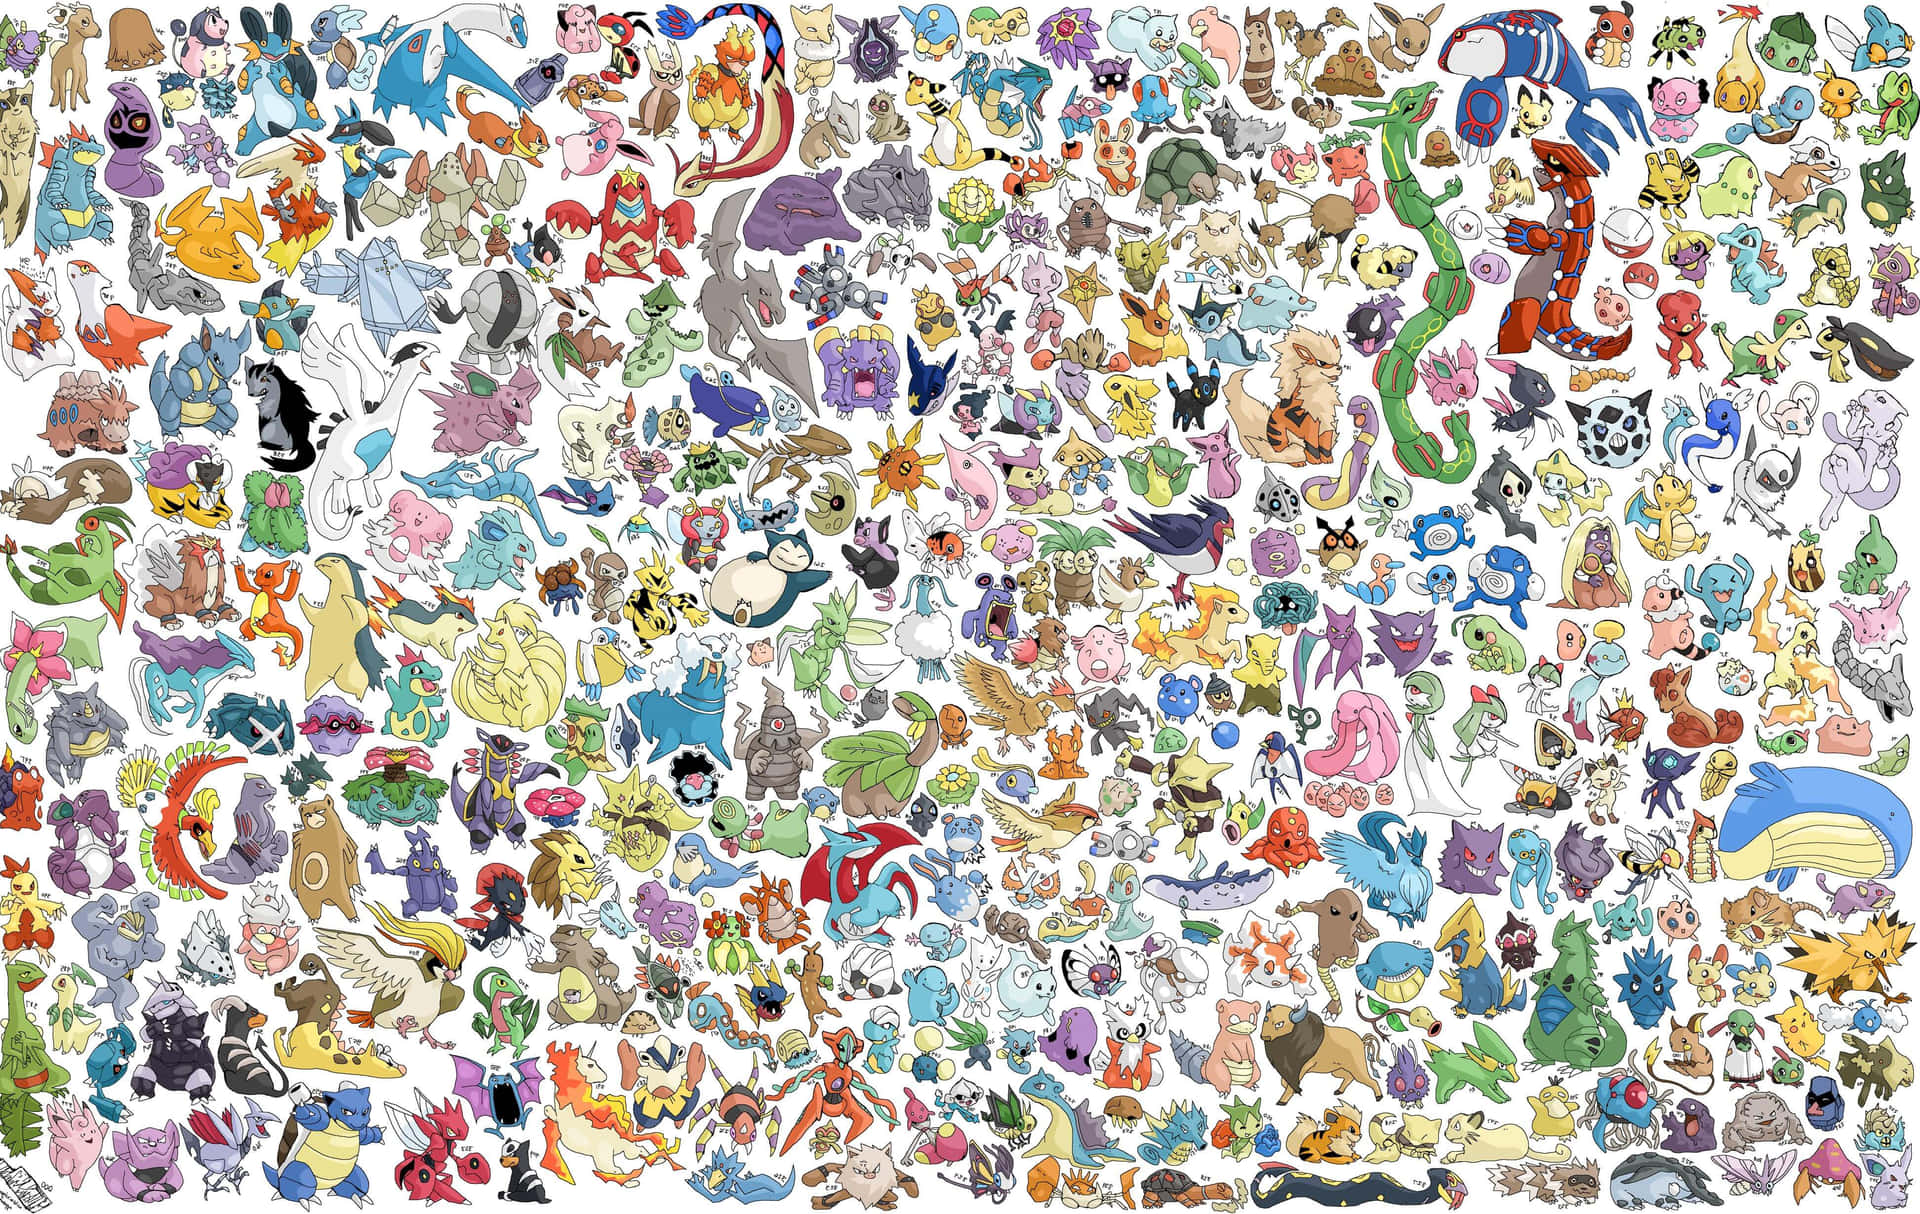 A Variety of All Pokemon - From Pikachu to Squirtle